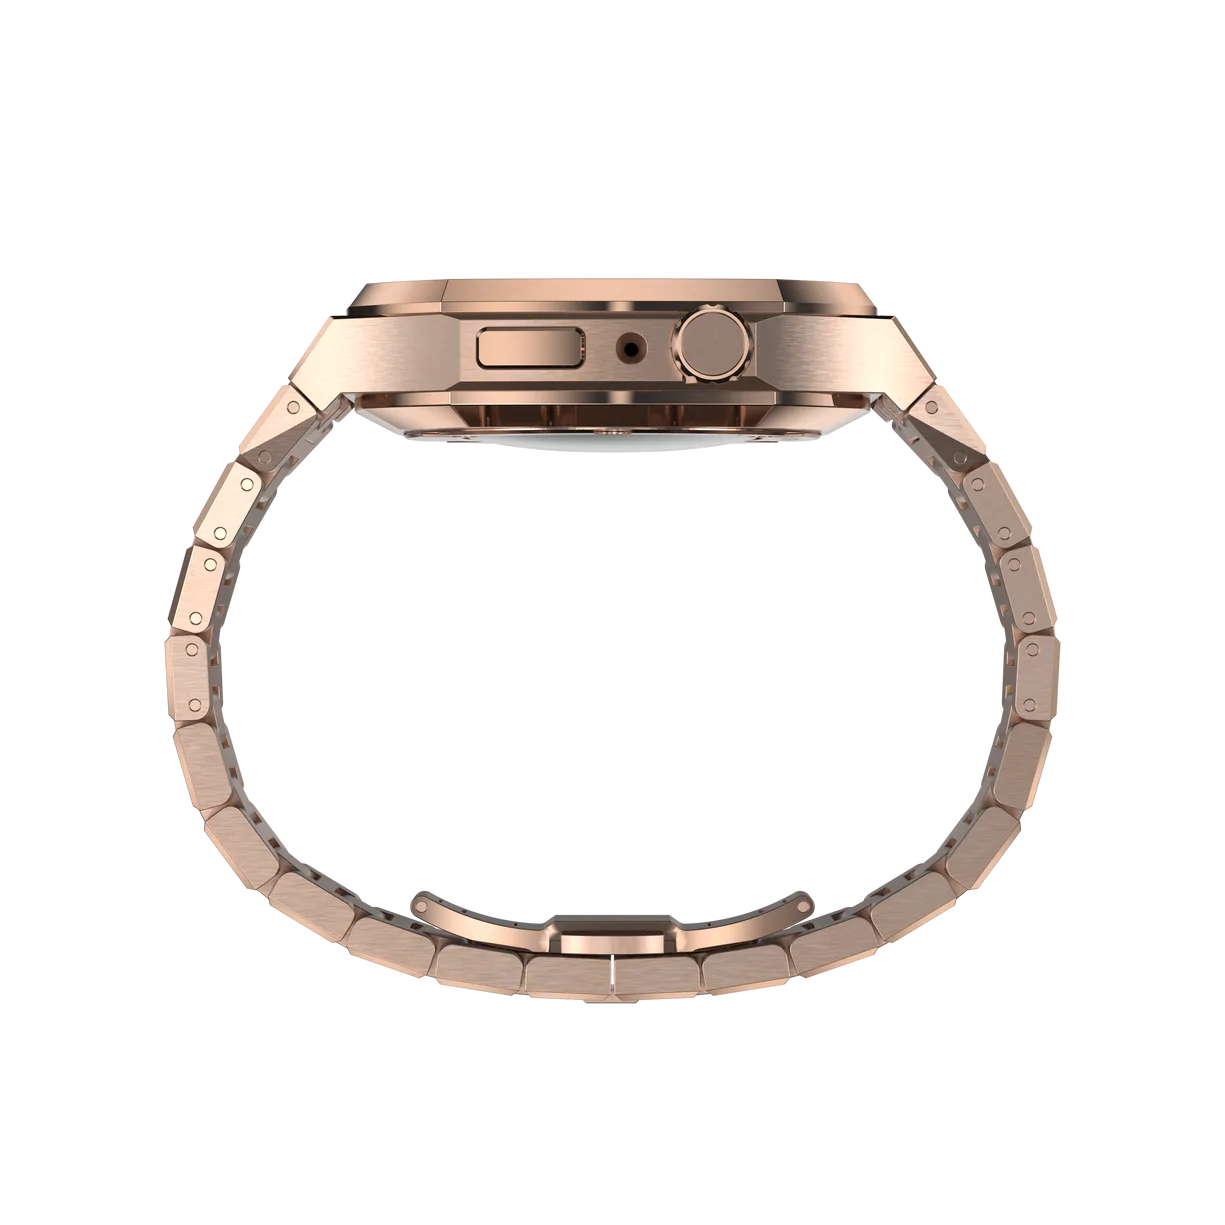 Royal ™ Metal series - Strap + protector for Apple Watch 